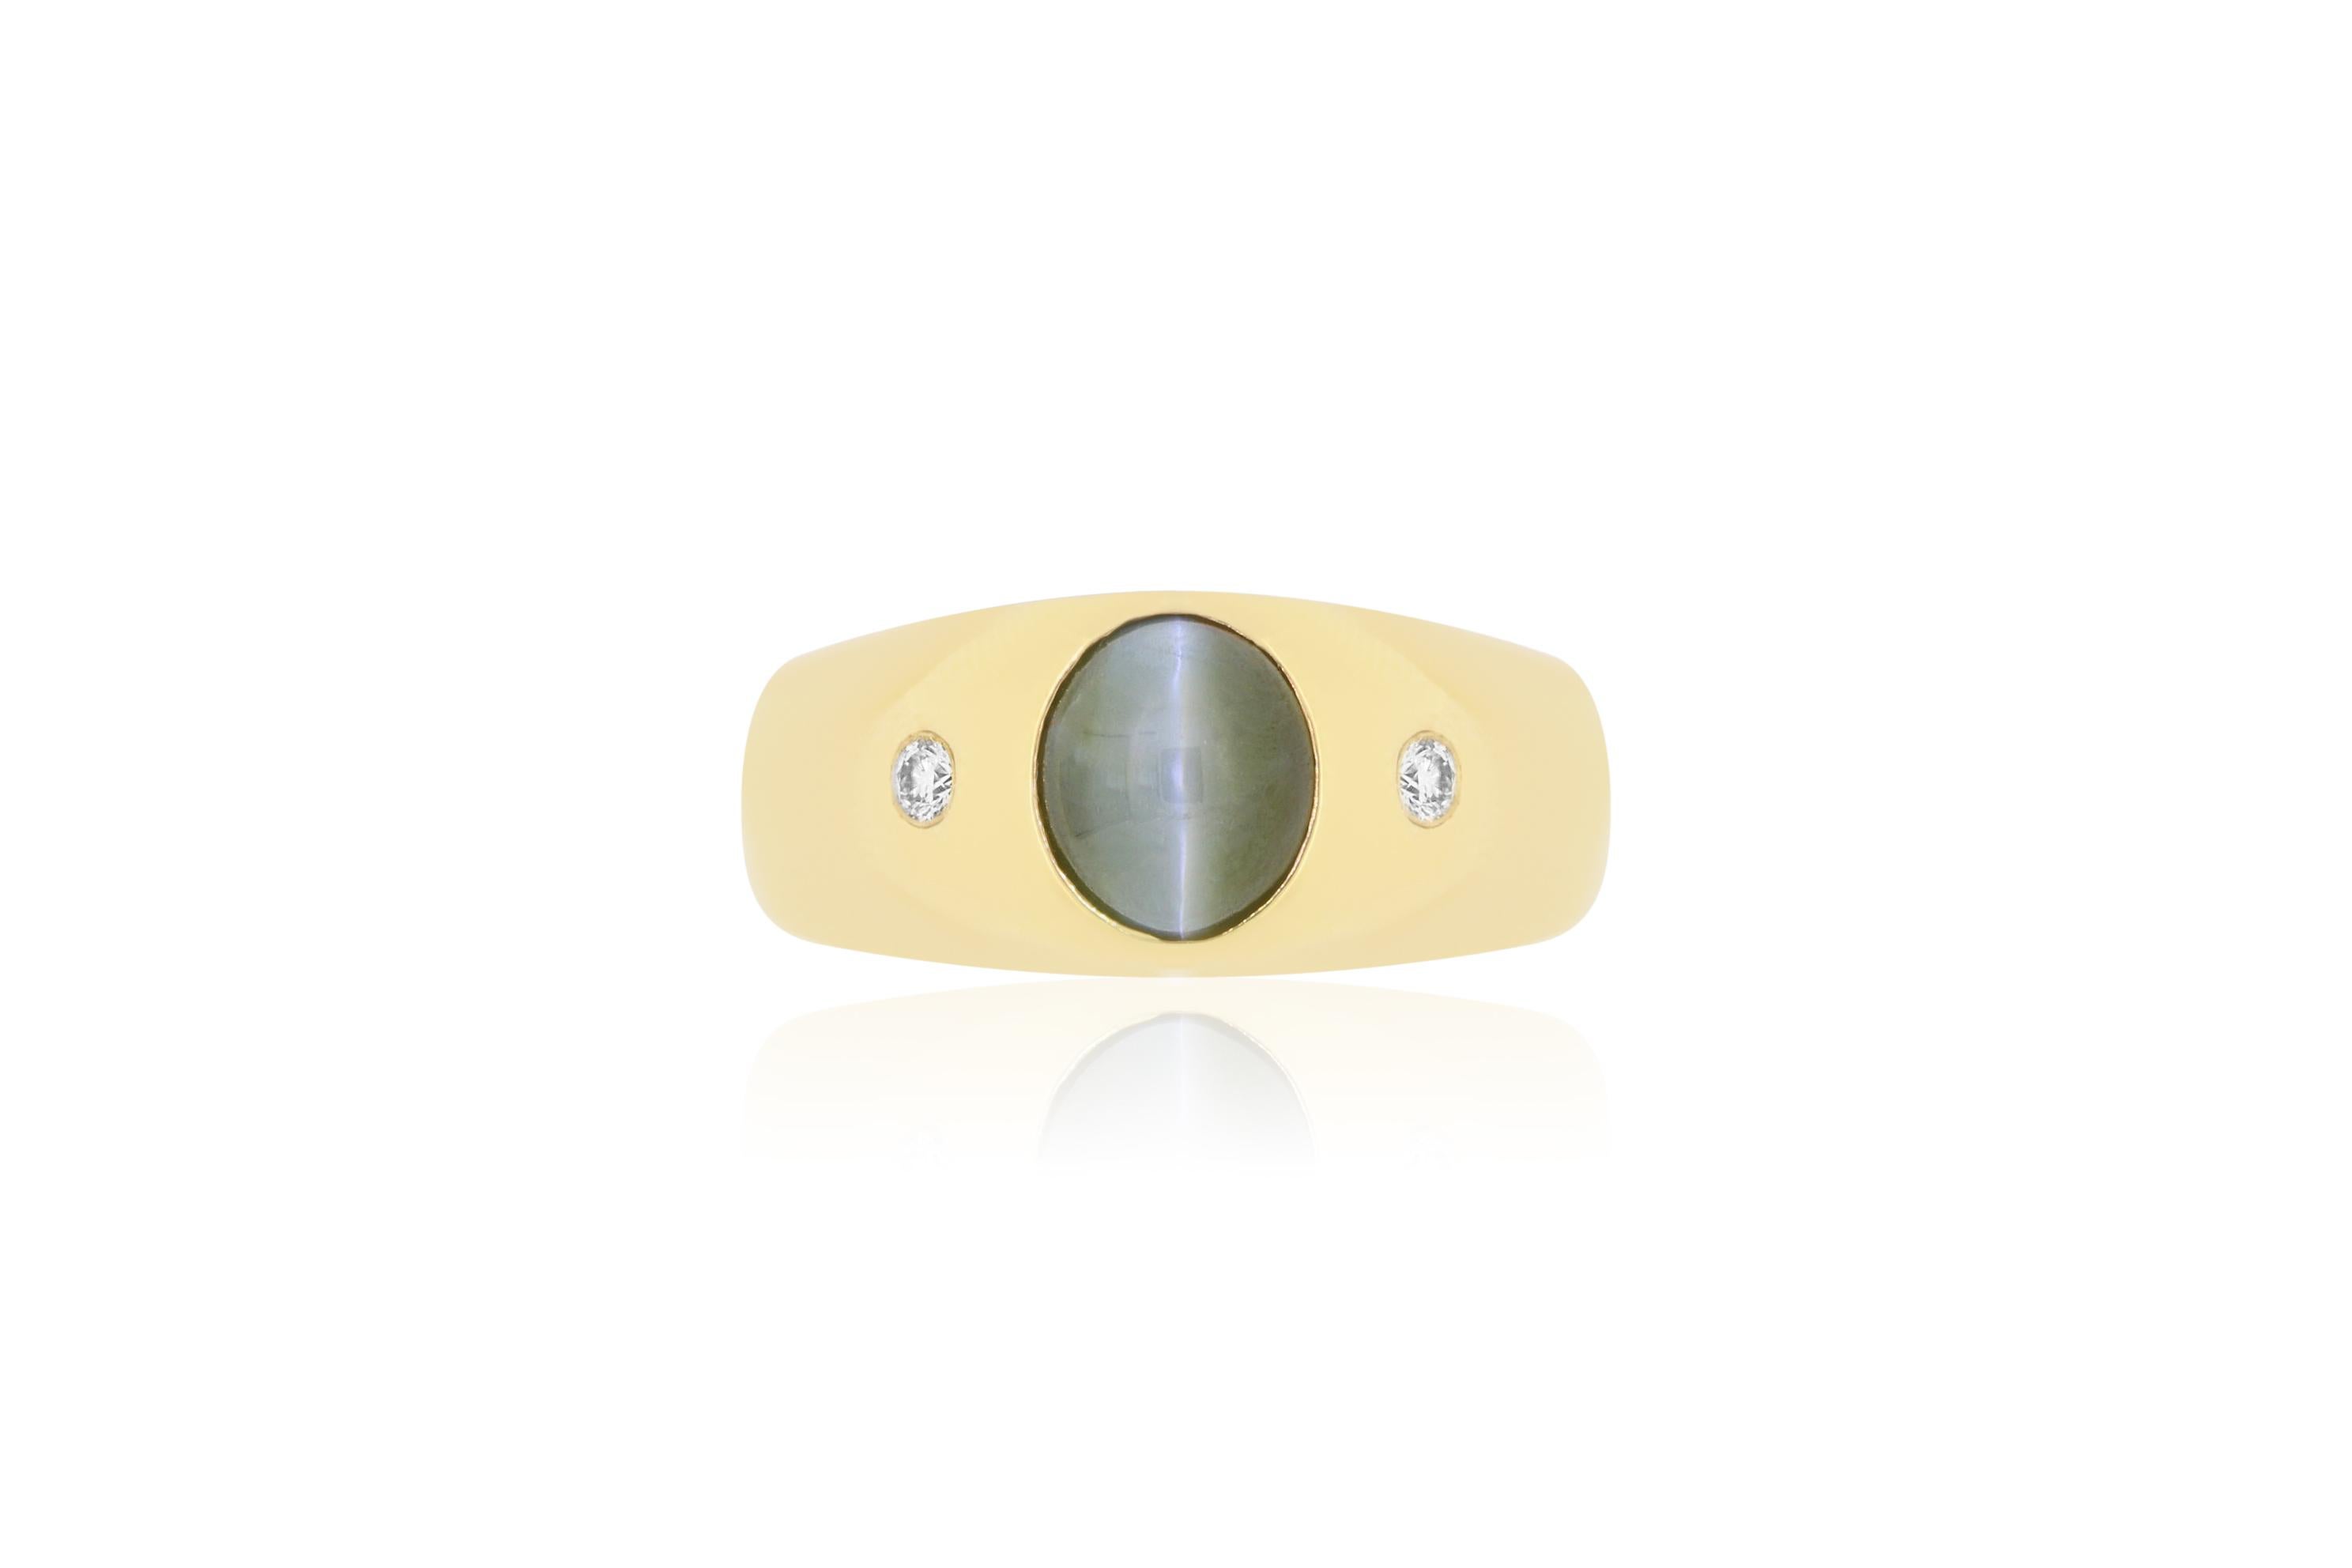 This unique oval 2.66 carat Chrysoberyl Cats Eye is set in a 14k Yellow Gold with 2 accent white diamonds. This sleek modern setting accentuates the alluring and unique Cats Eye stone.

Material: 14k Yellow Gold
Colored Diamond: 1 Oval Cut